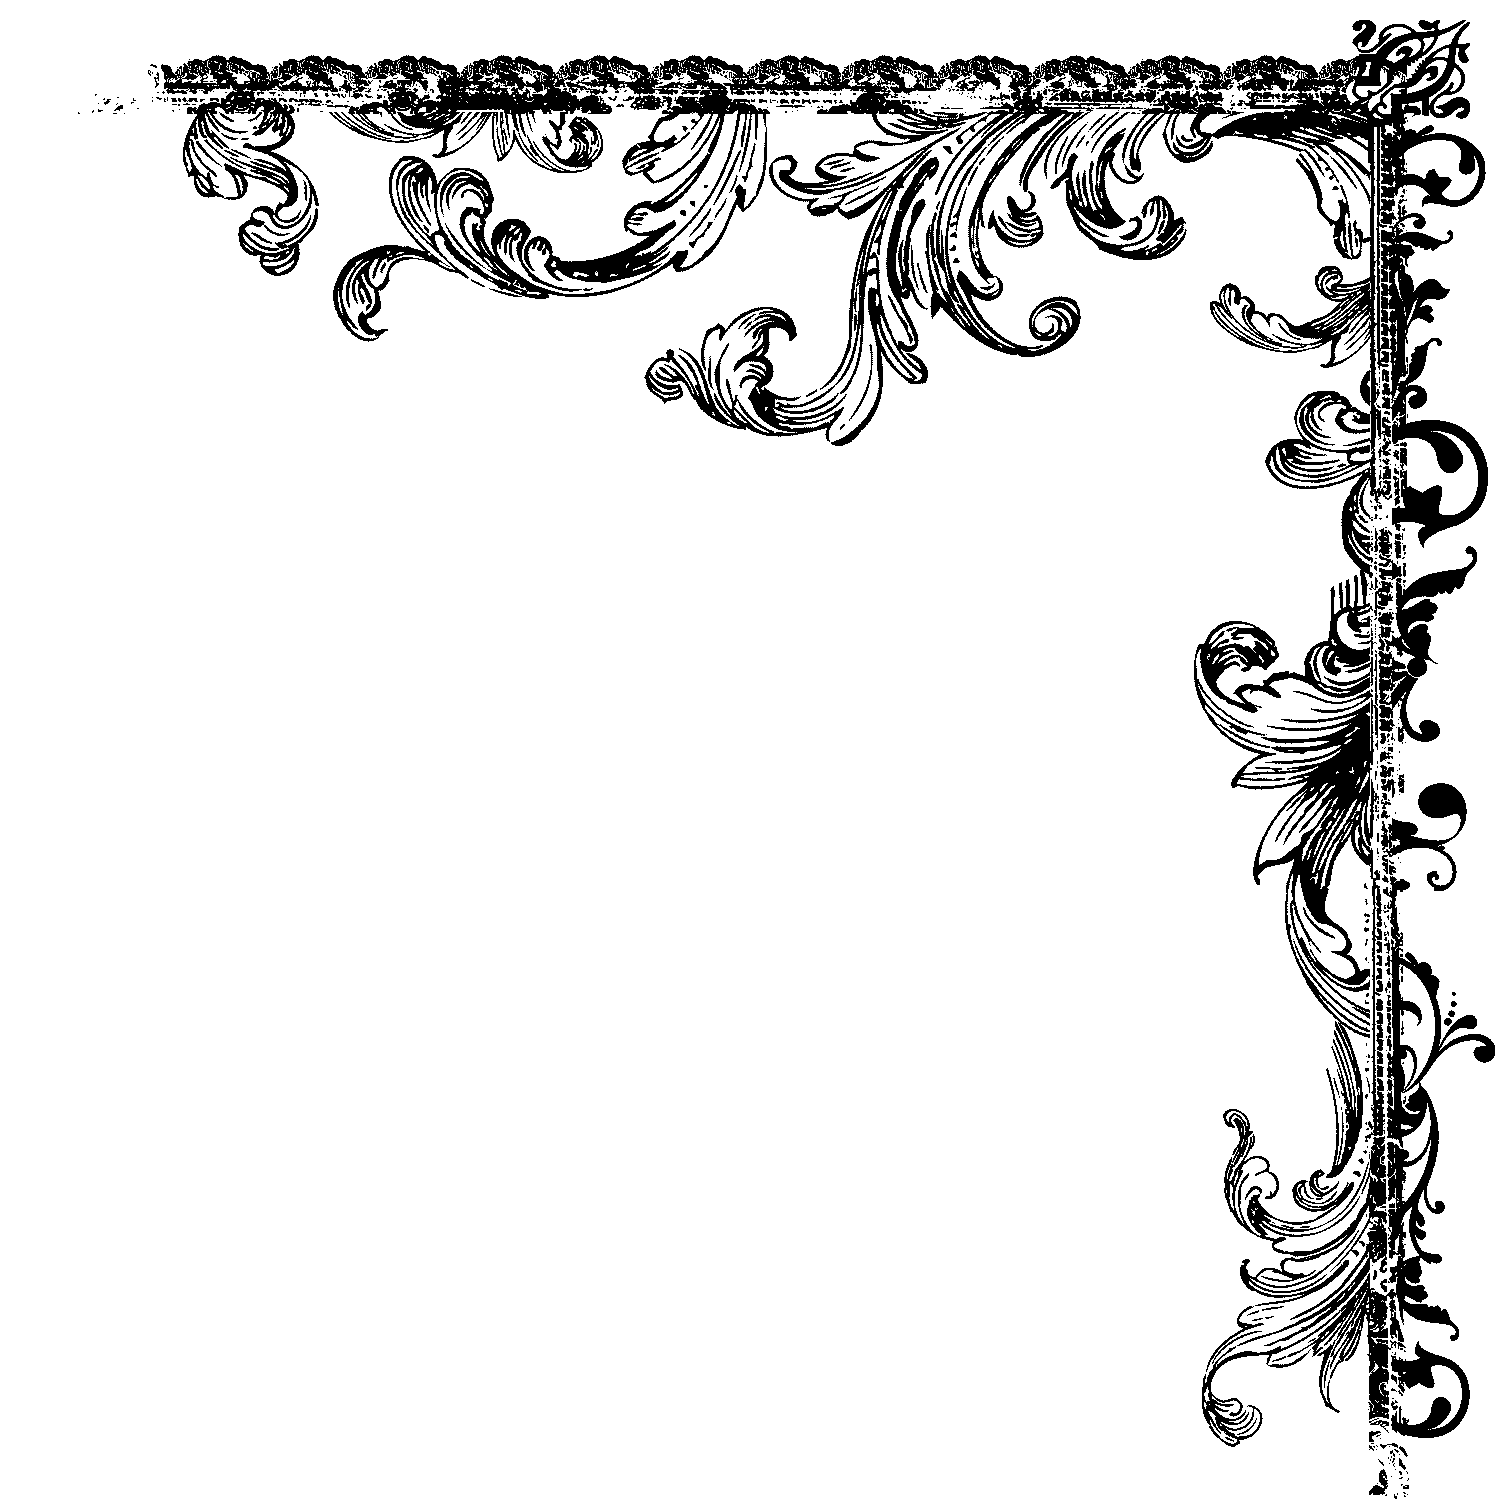 Decorative clipart baroque. Use the form below